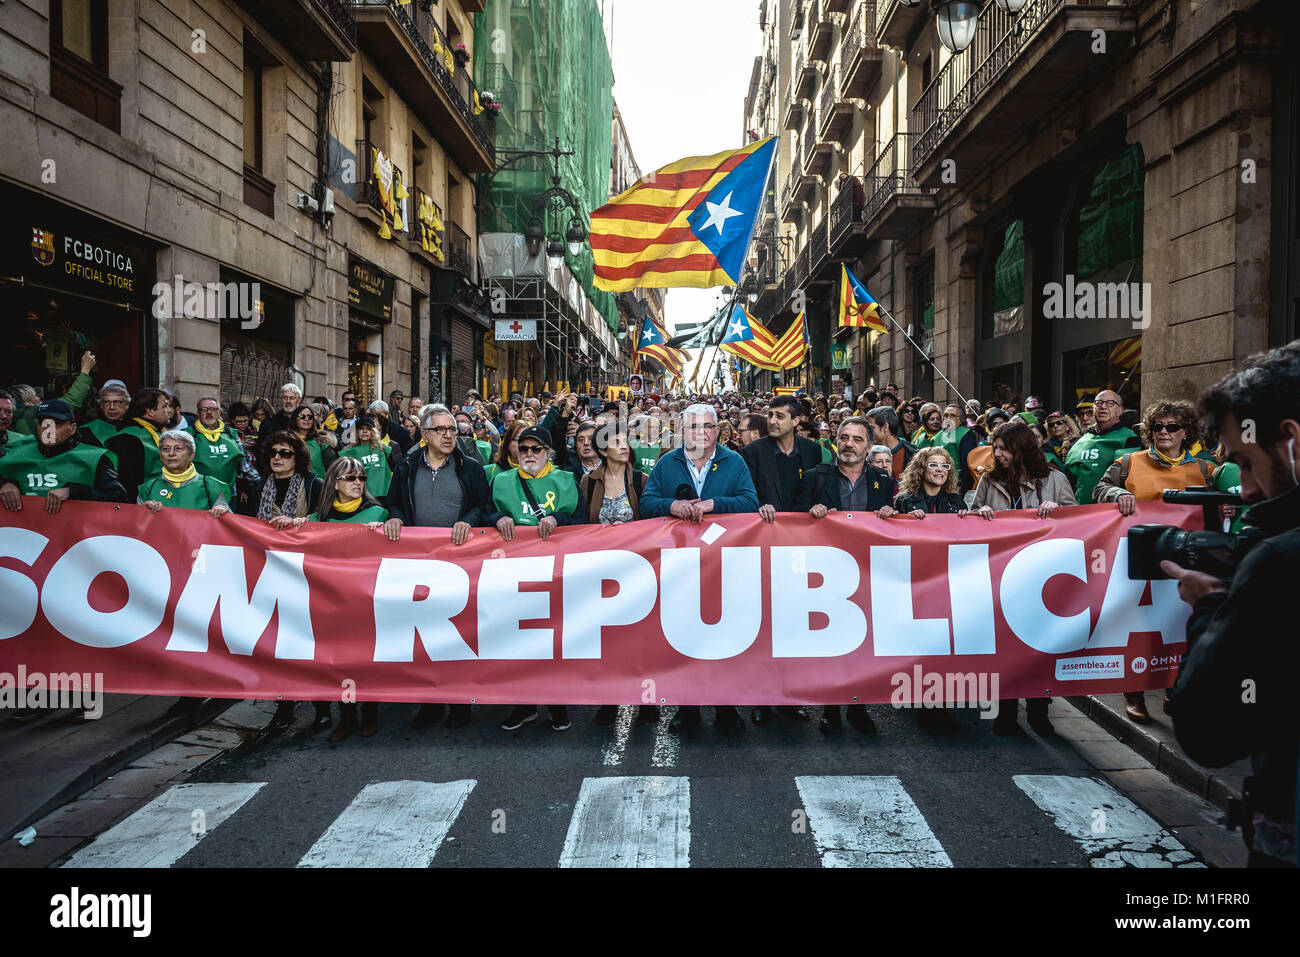 Barcelona, Spain. 30 January, 2018:  Catalan separatists march behind their banner reading 'We are Republic' as they protest to maintain today's investiture session at the Catalan Parliament. The Catalan Parliament has postponed today's vote for the Presidency of the Generalitat after recent decisions by Spain's Constitutional Court but sticks with Carles Puigdemont, Catalonia's fugitive ex-president. Credit: Matthias Oesterle/Alamy Live News Stock Photo